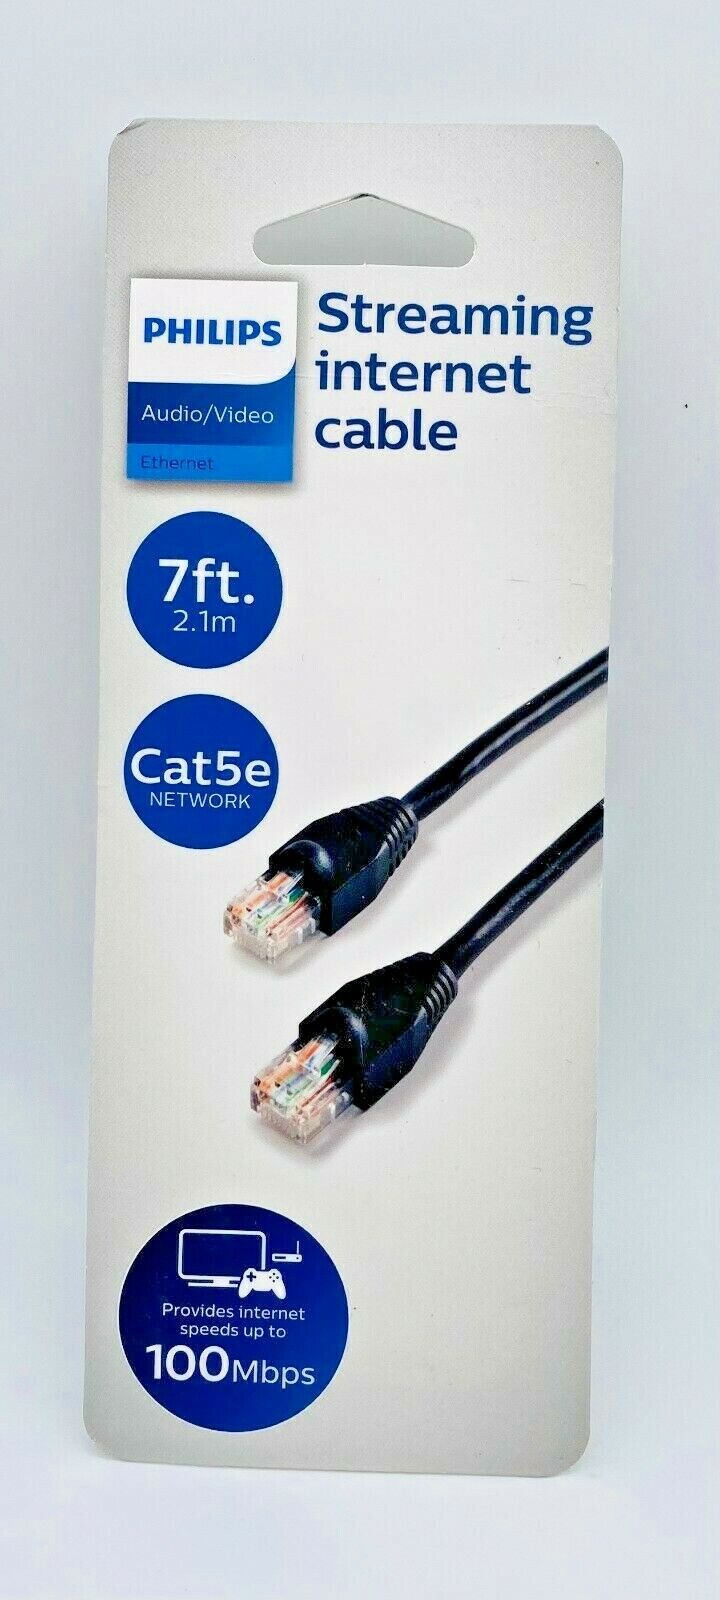 Philips Streaming Ethernet Cable Cat 5e - 7ft 